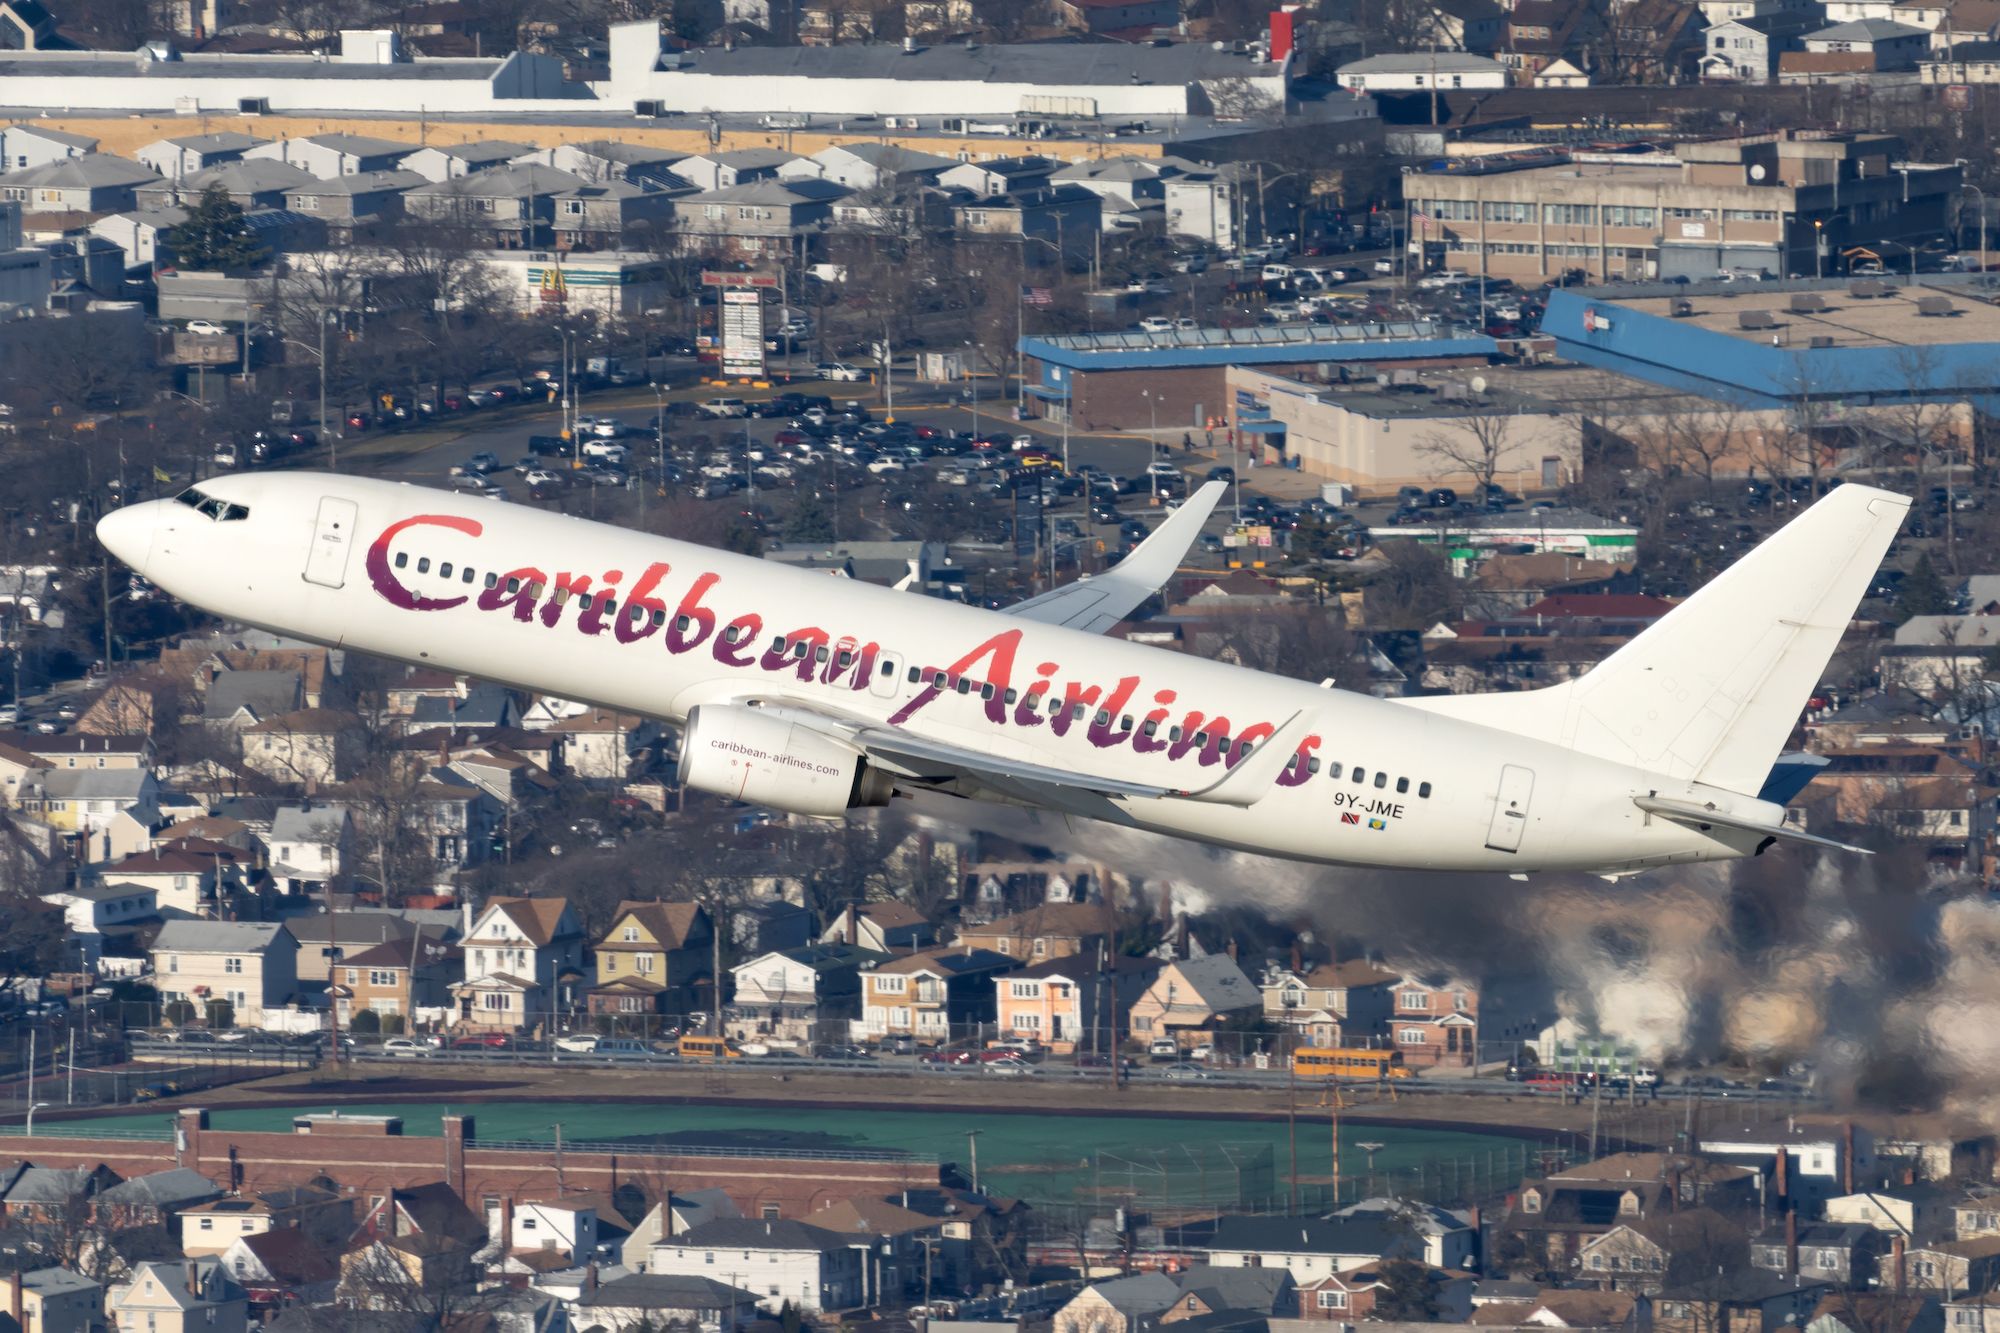 737 Caribbean Airlines